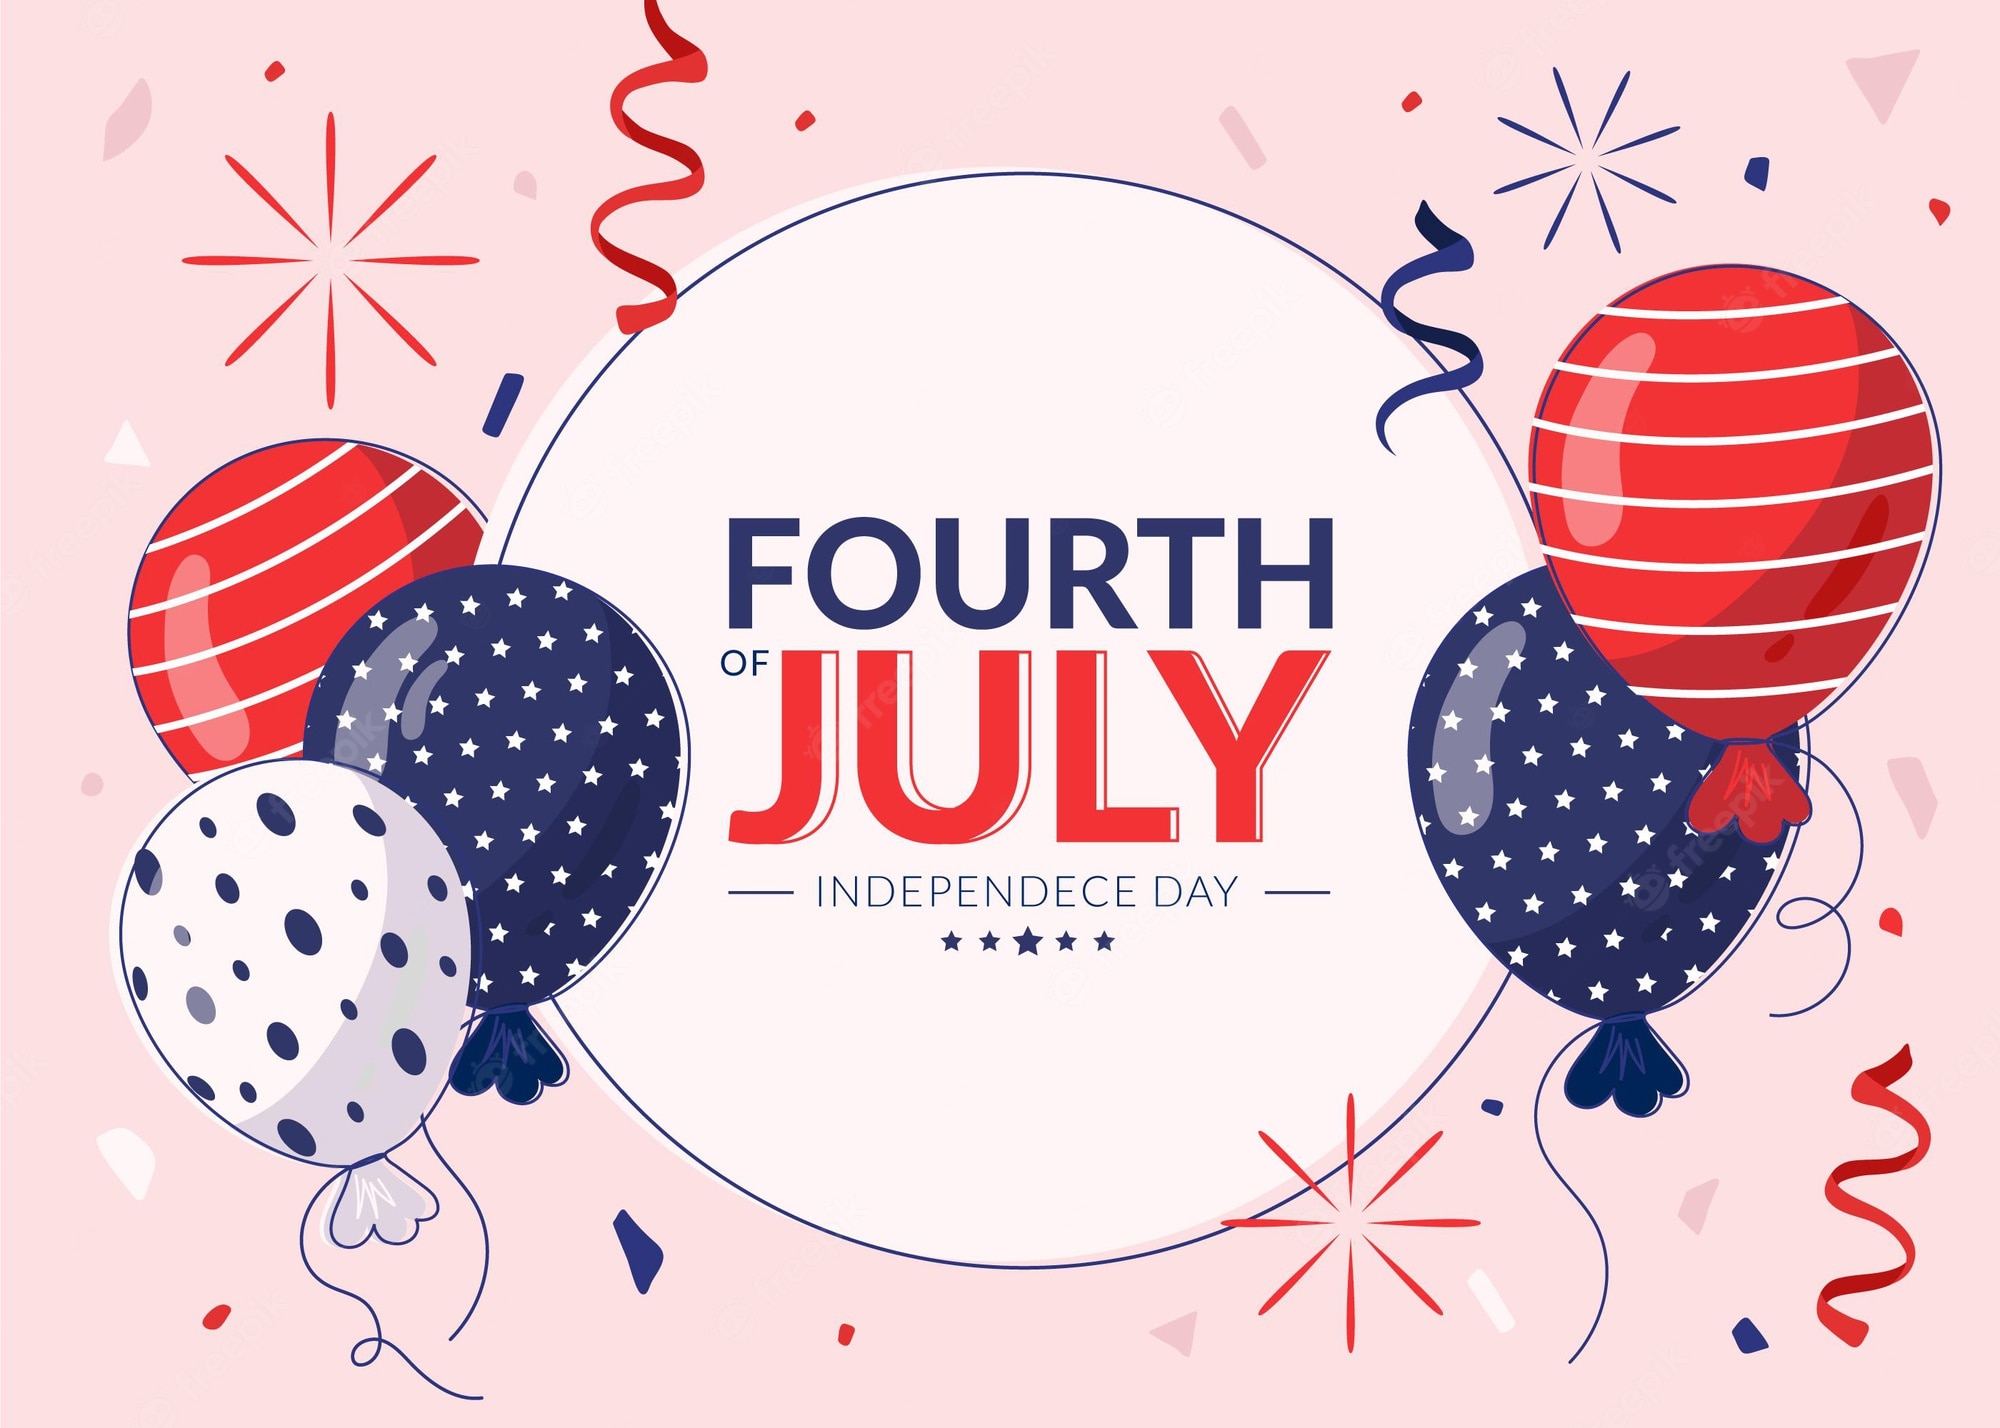 4th July Images Vectors Stock Photos PSD 2000x1428